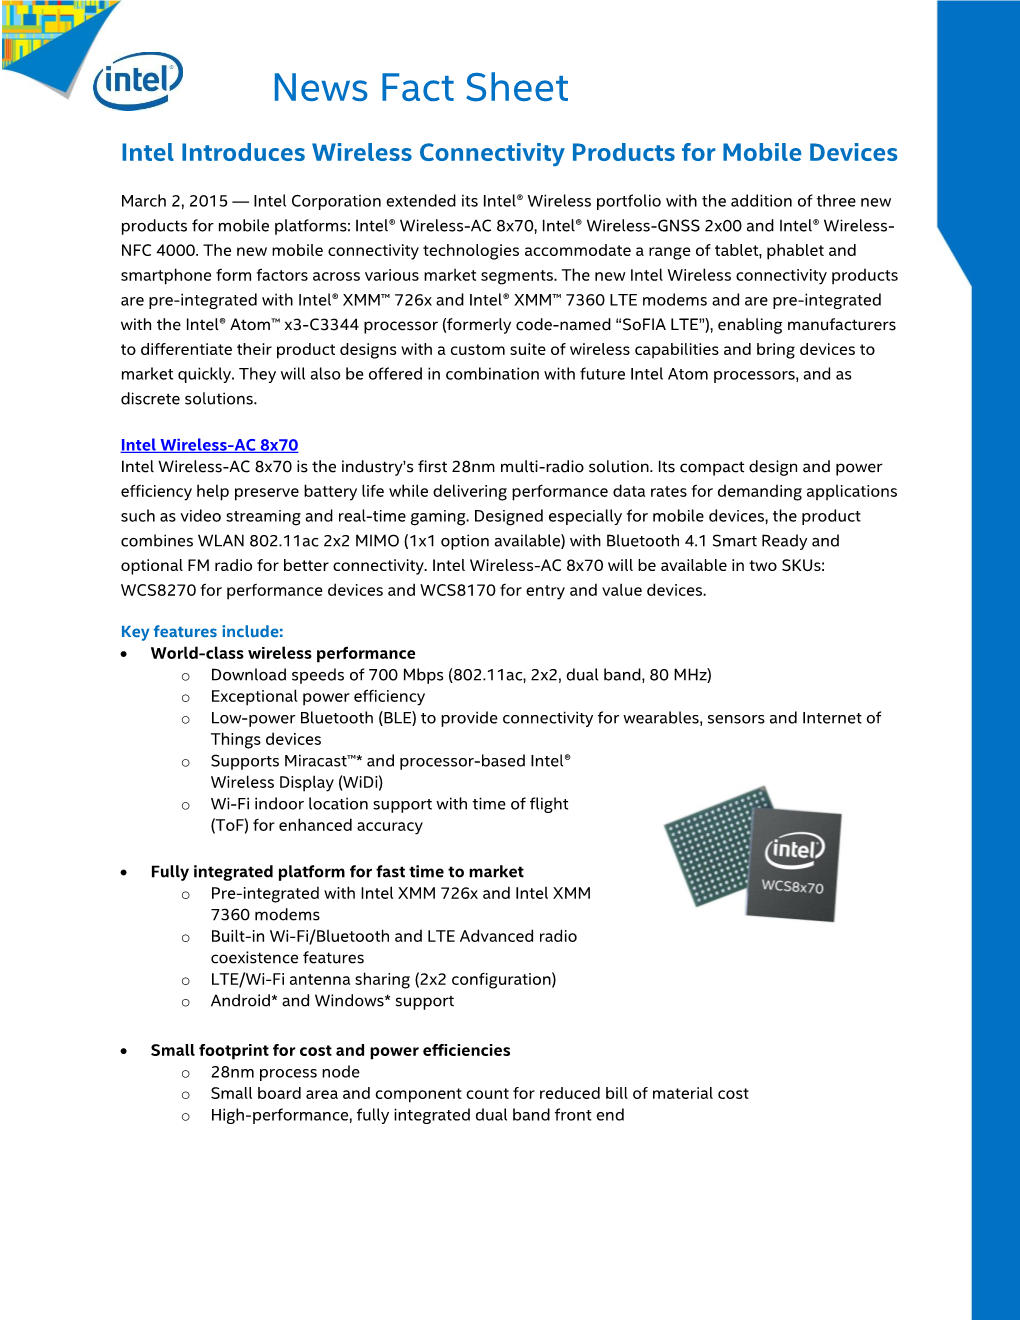 Fact Sheet: Intel Introduces Wireless Connectivity Products for Mobile